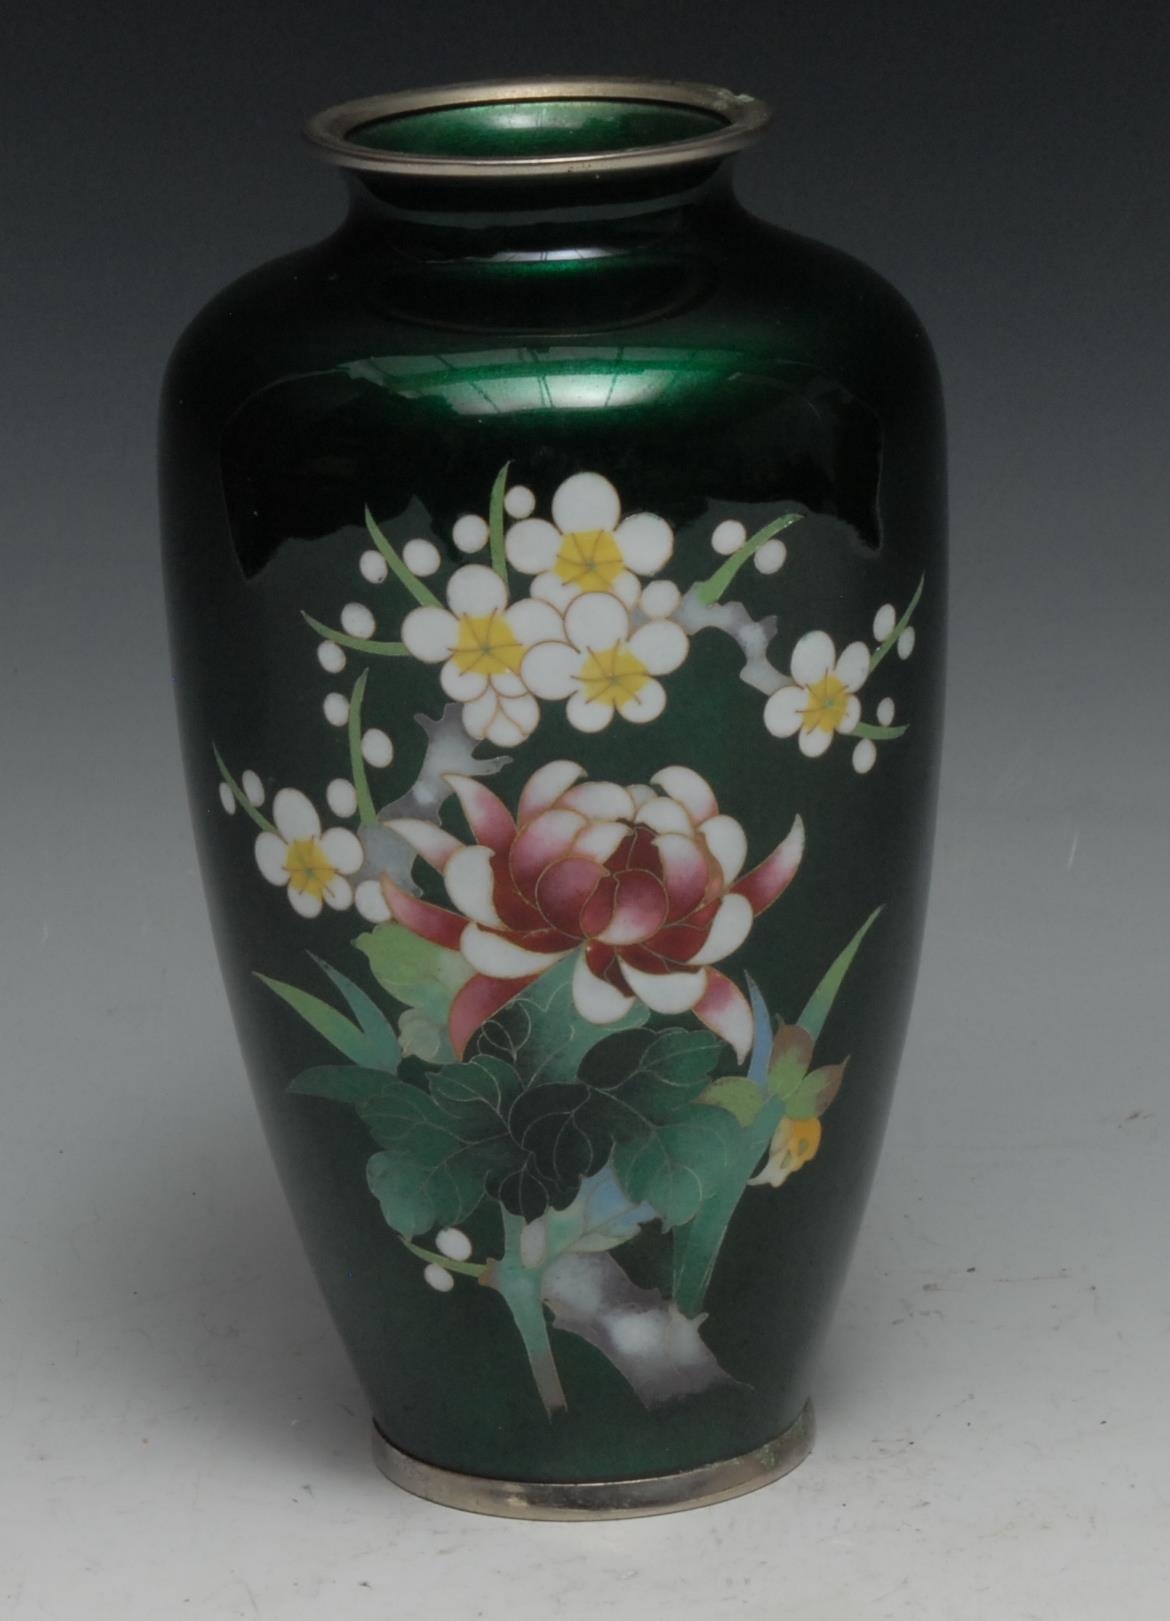 A Japanese cloisonne enamel ovoid vase, decorated in polychrome with chrysanthemums and blossoming